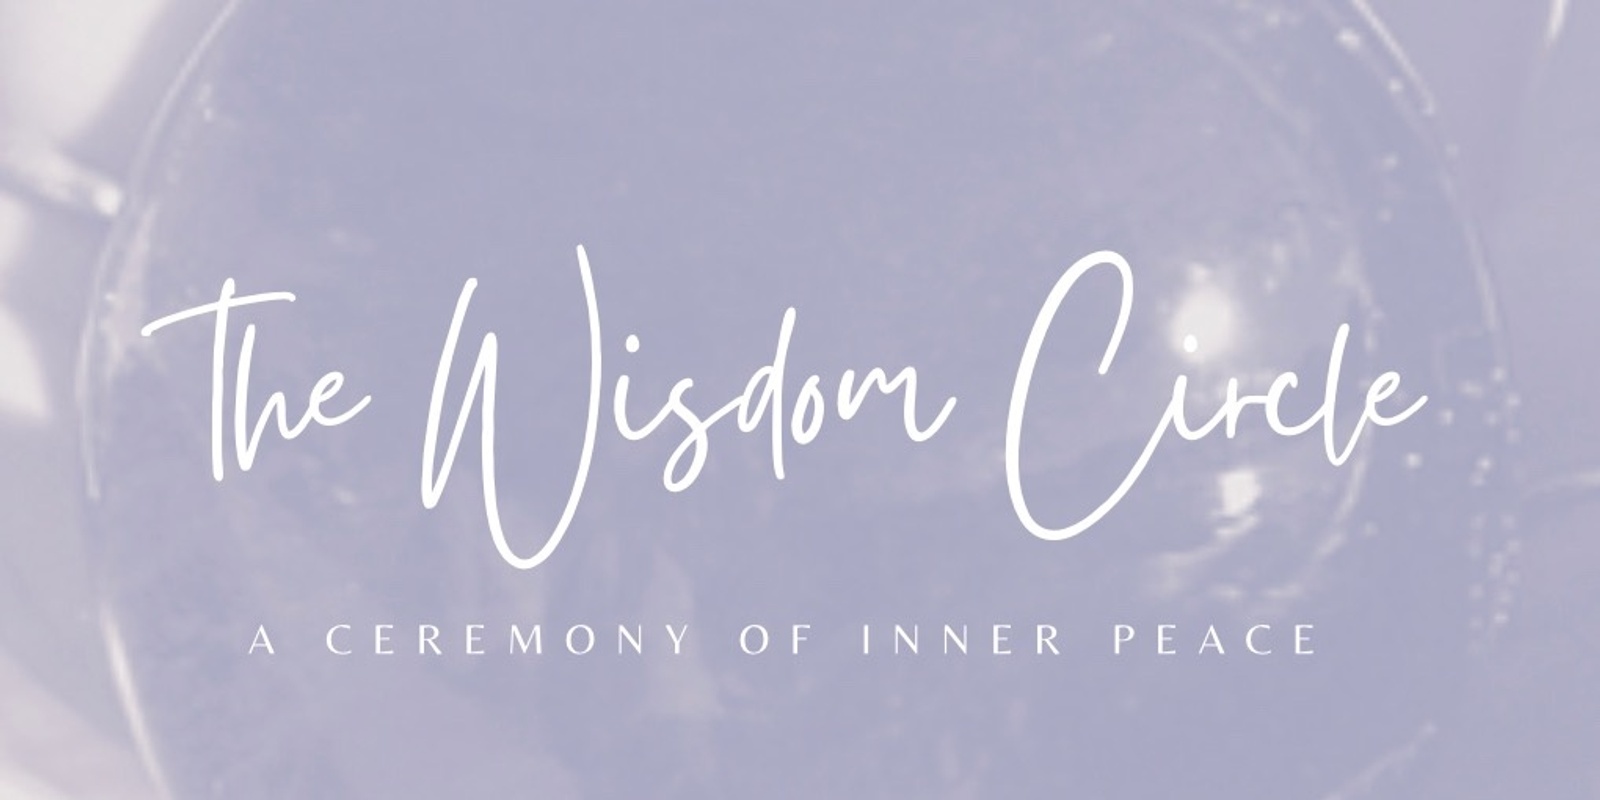 Banner image for The Wisdom Circle